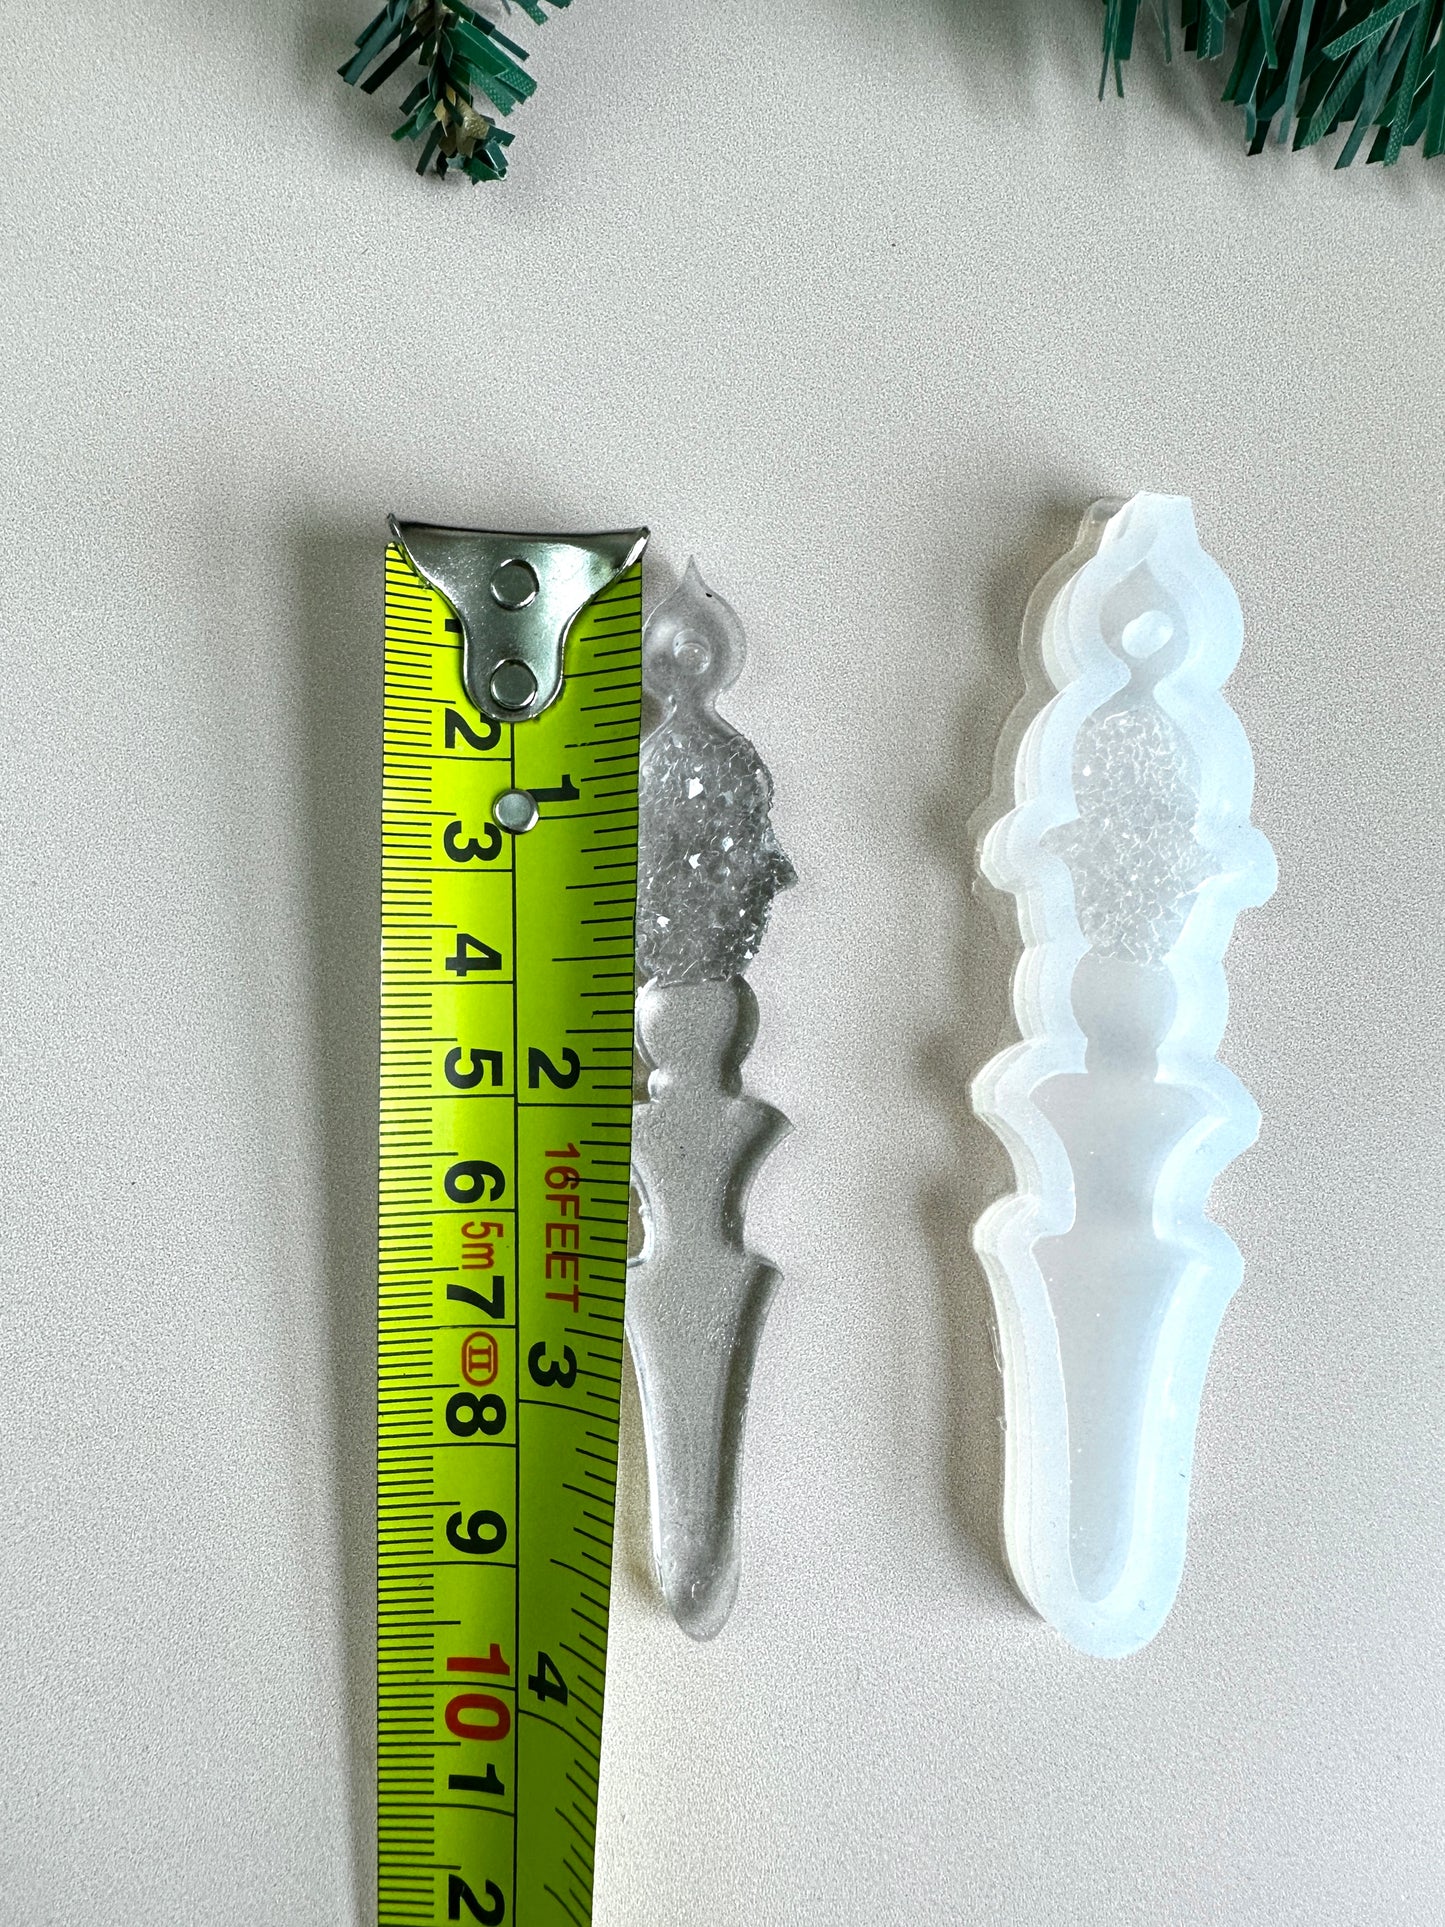 Christmas Tree-Christmas Icicle Silicone Mould with Crystals, For Resin Art Creations, Artistic Christmas Gift for DIY Lovers